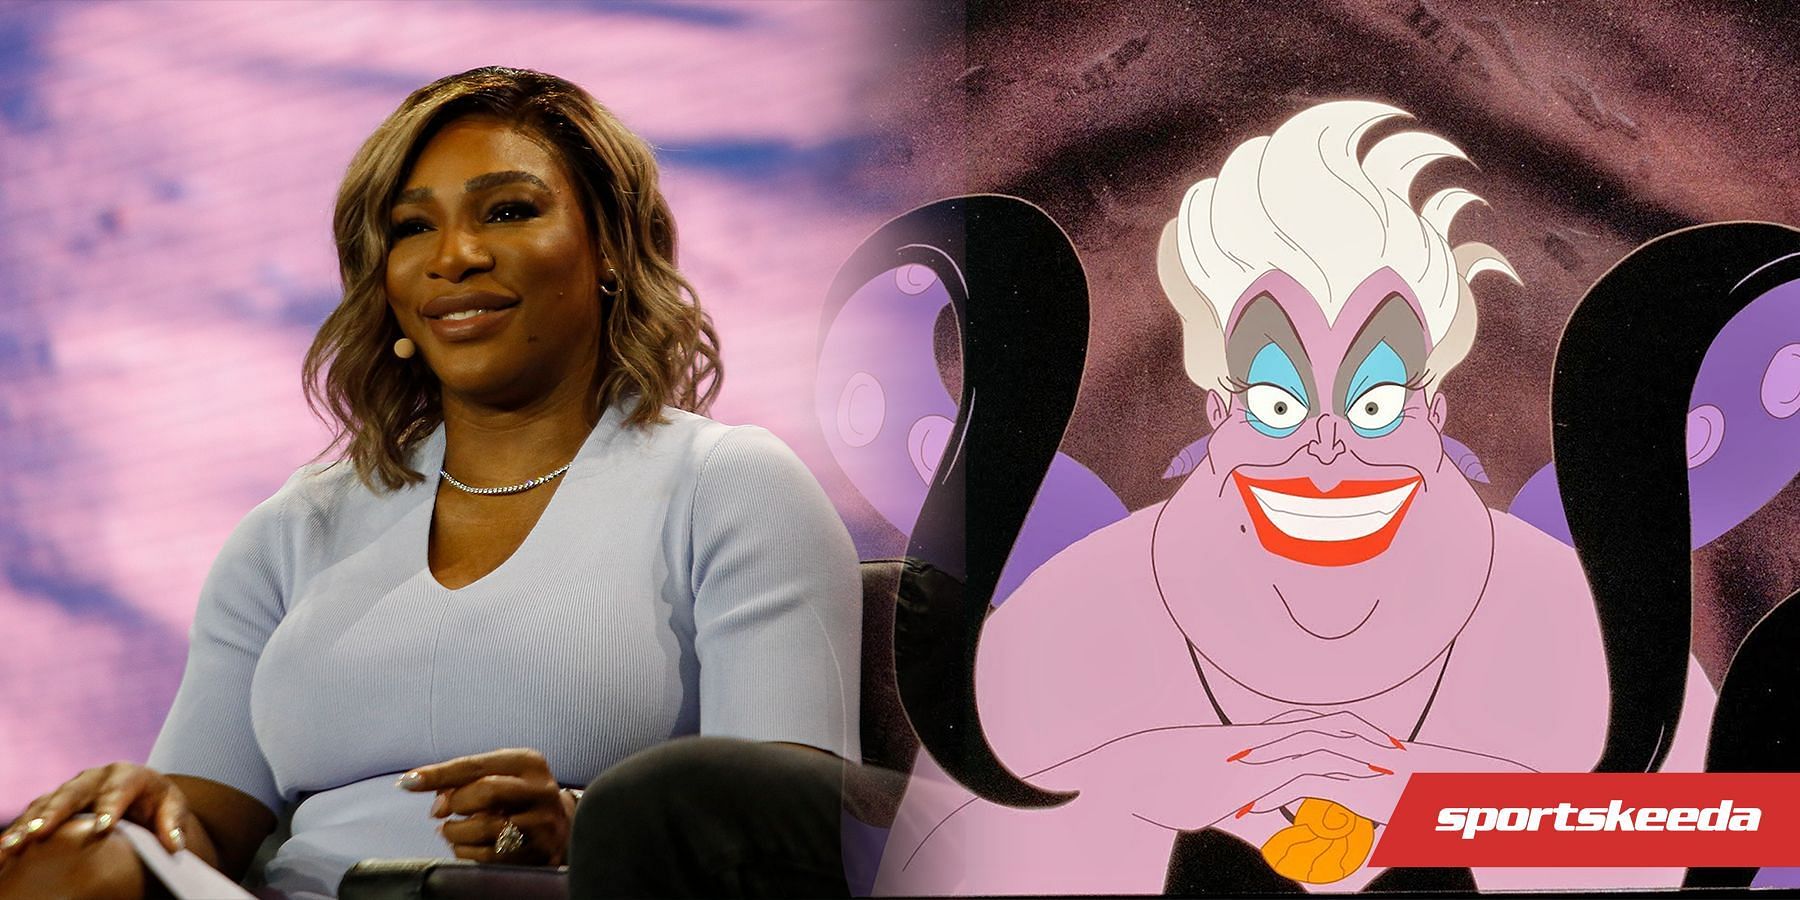 Serena Williams channelled her inner Ursula to talk about the importance of body language.